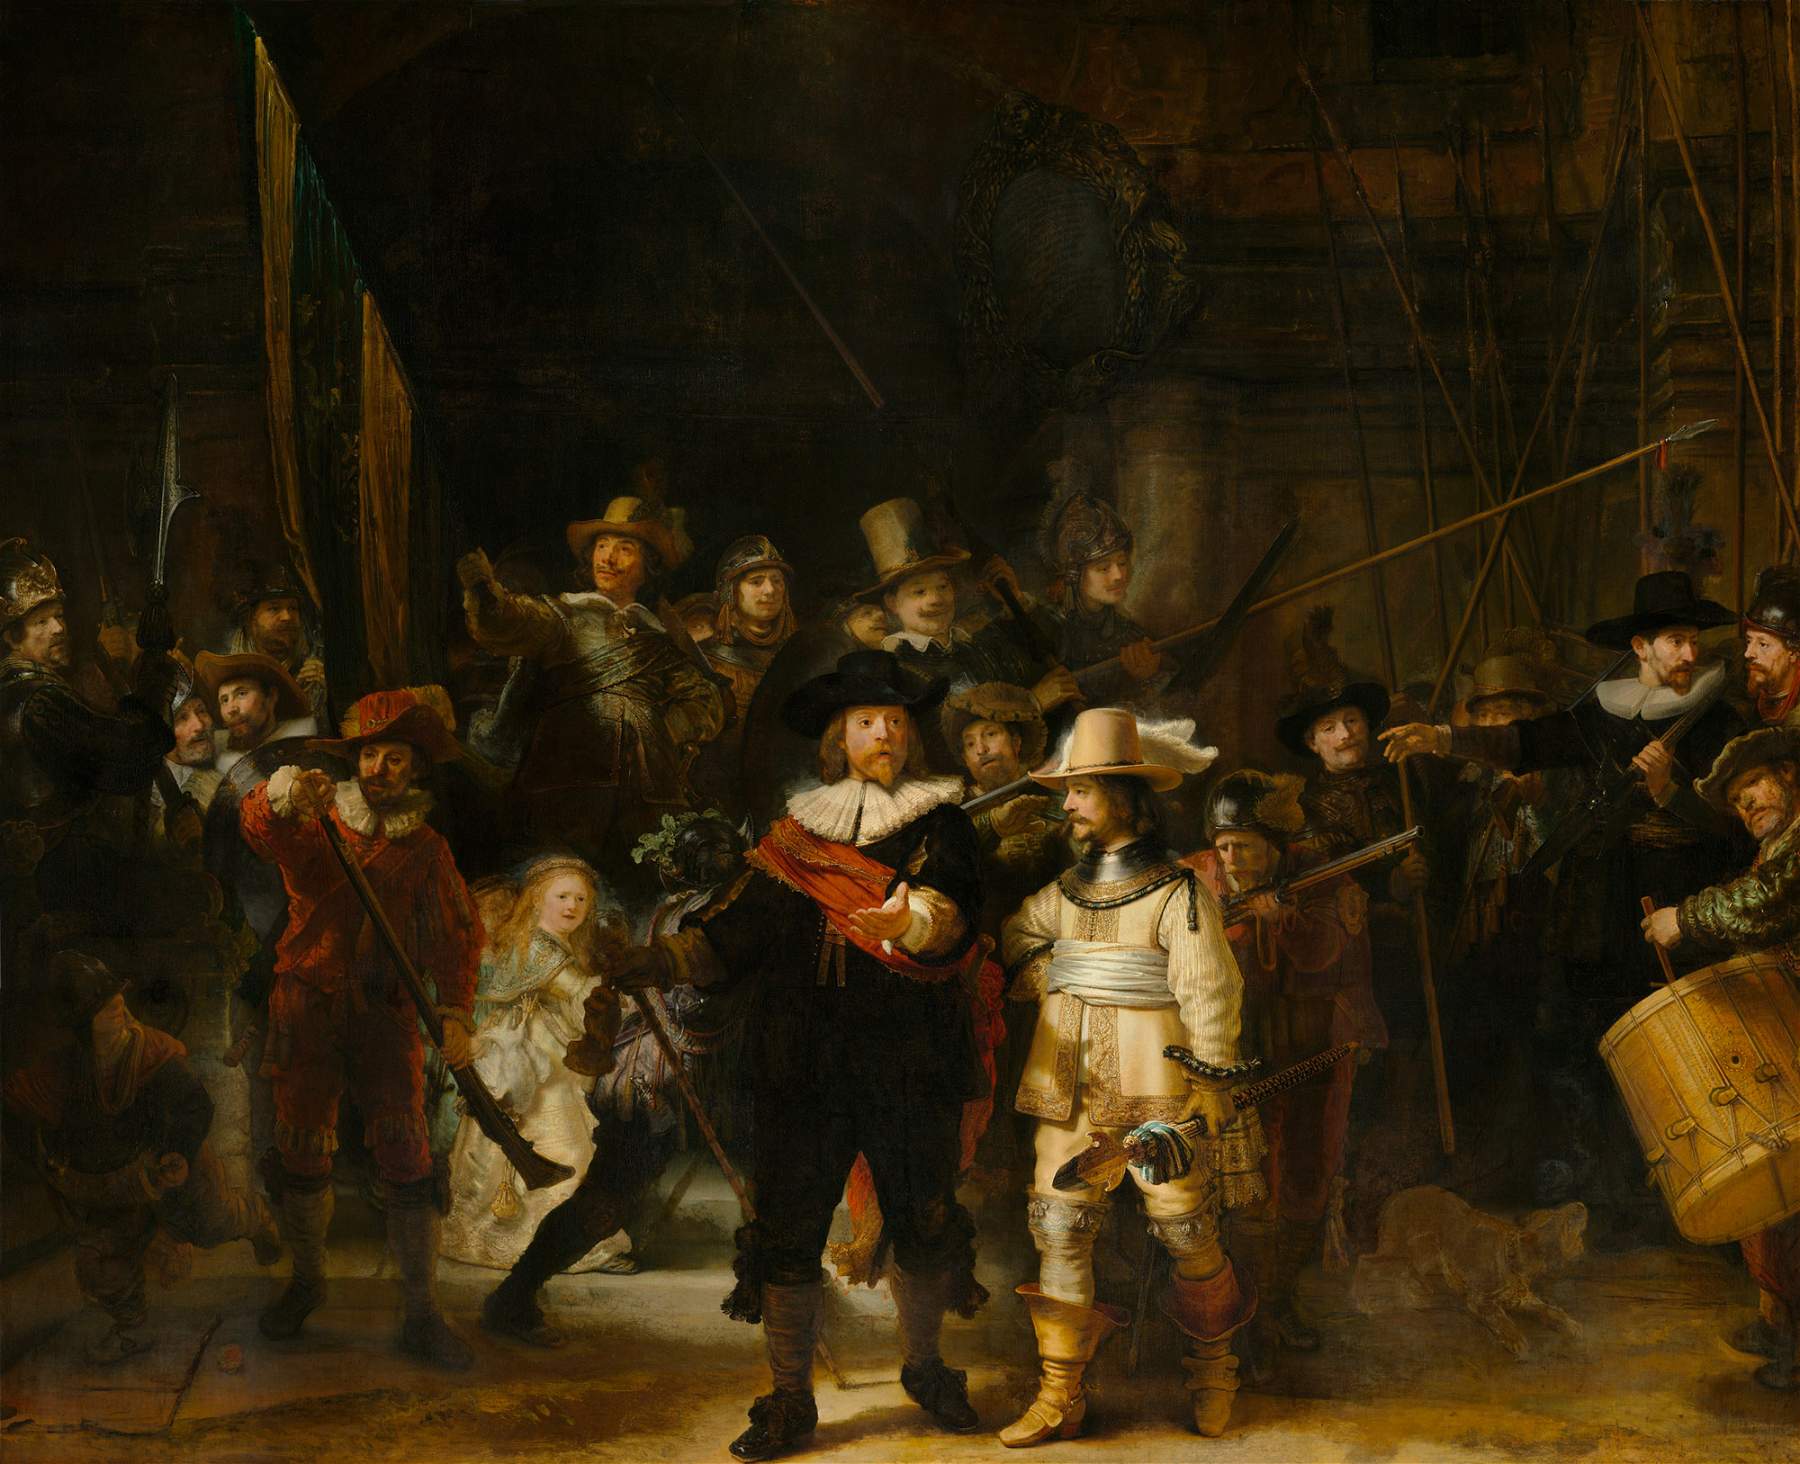 Preparatory drawing under the Night Watch, Rembrandt's masterpiece, discovered